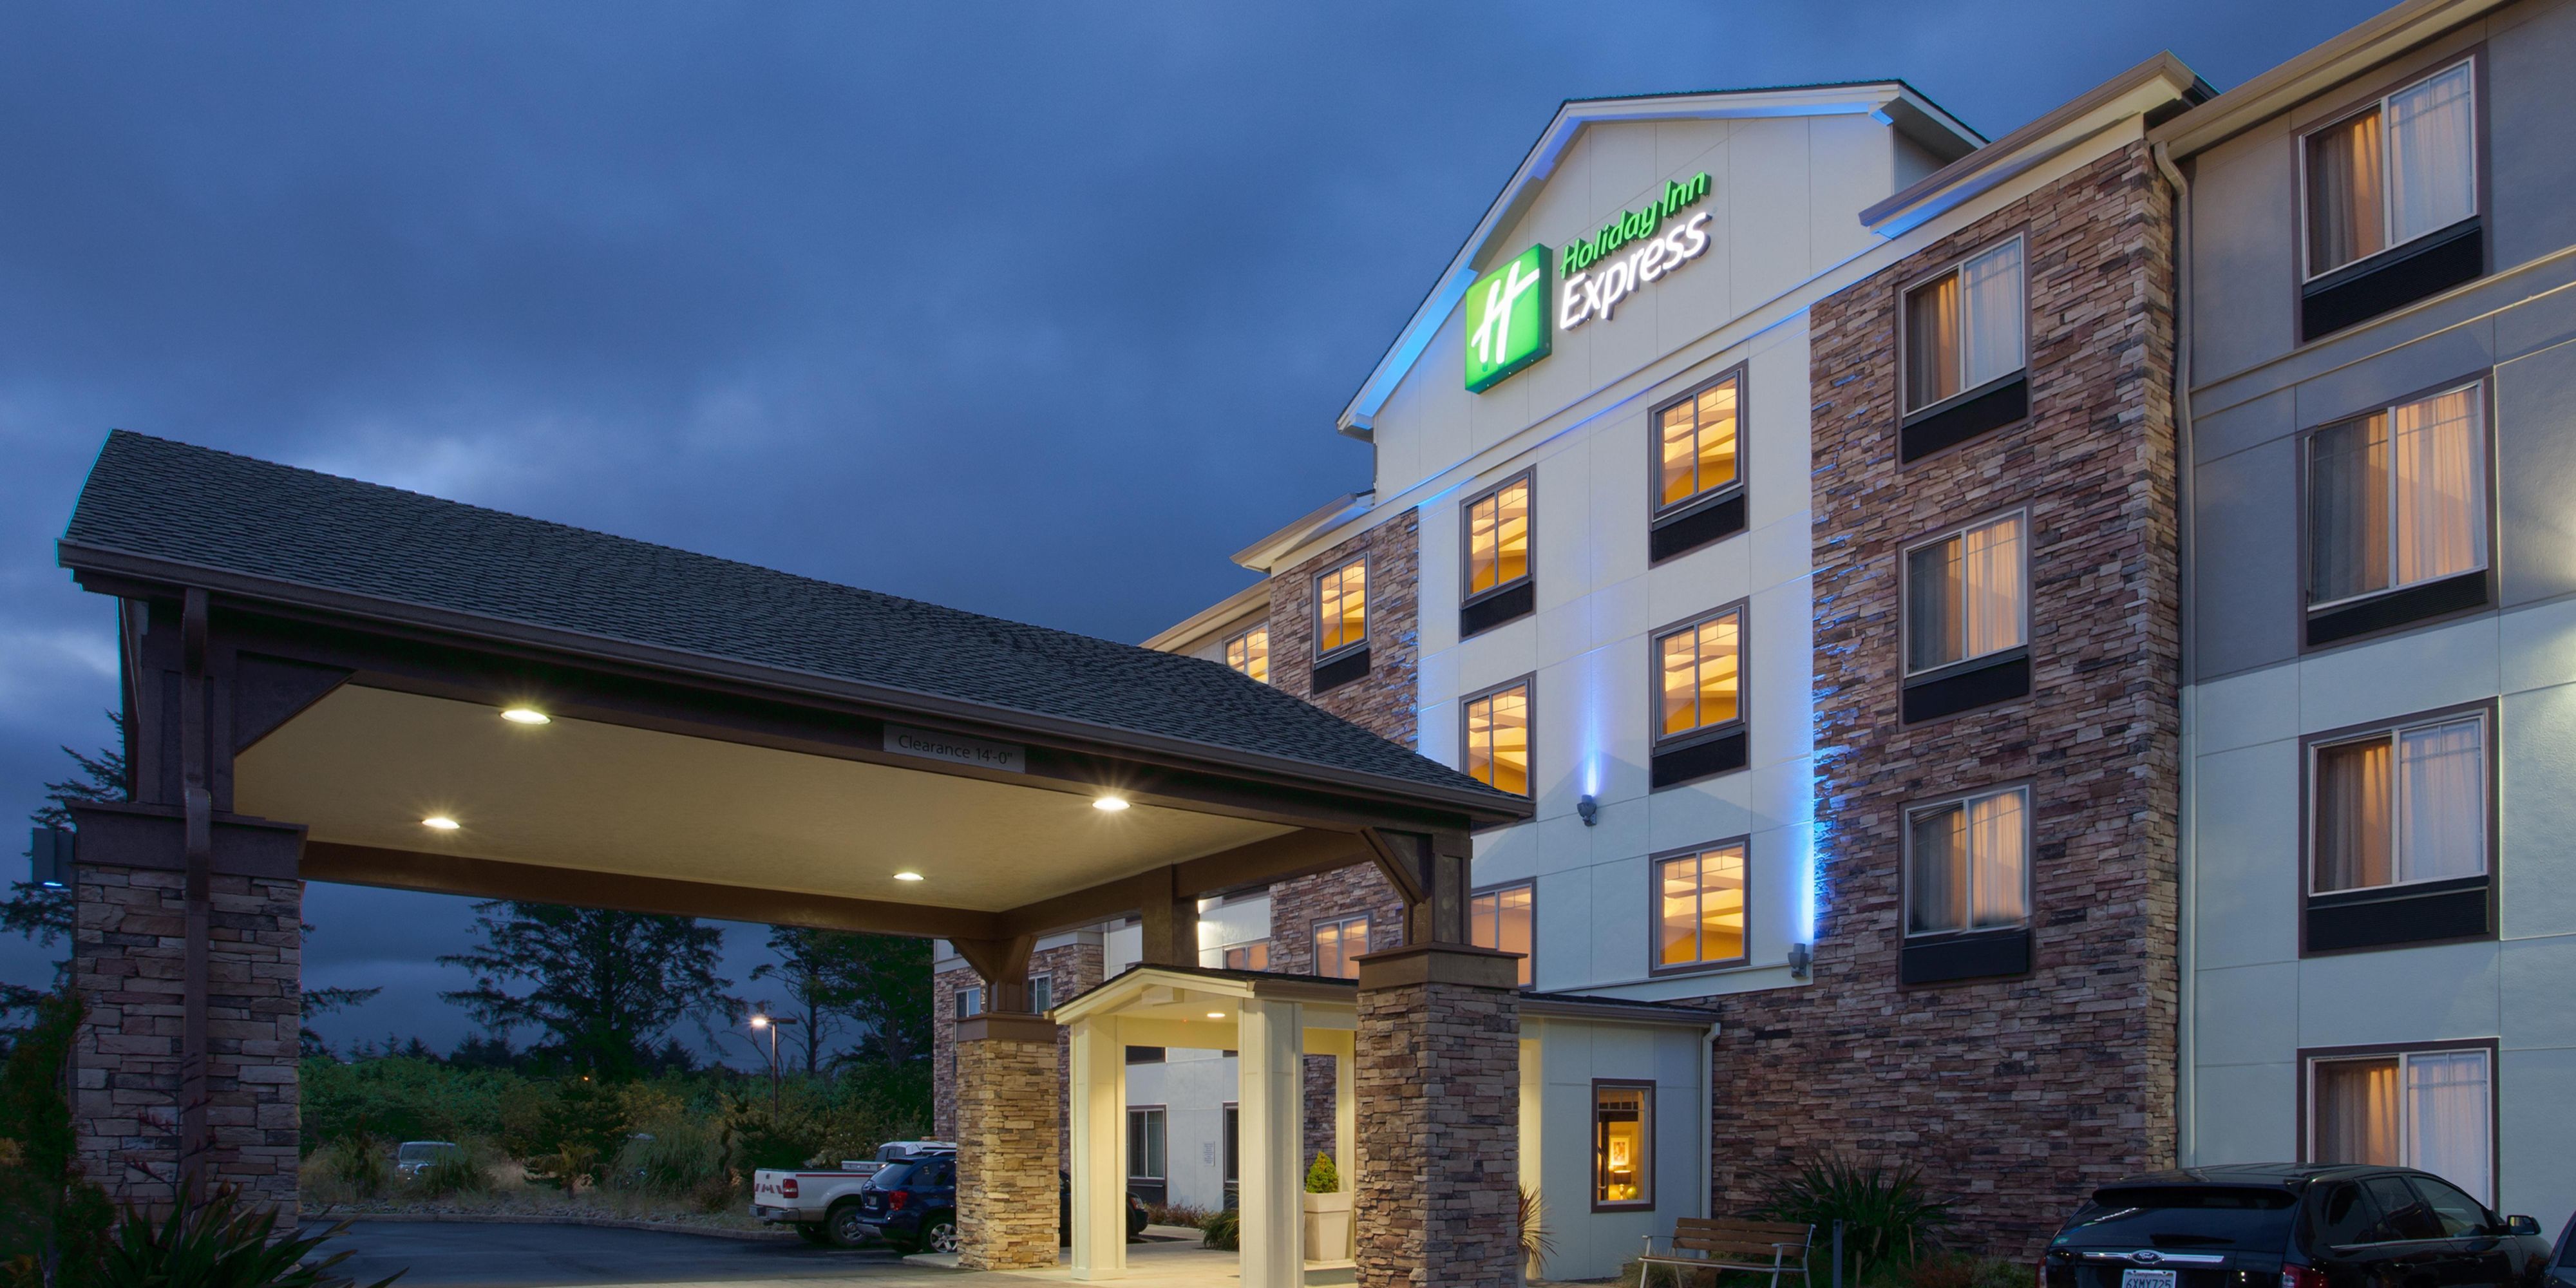 Photo of Holiday Inn Express & Suites Newport, Newport, OR